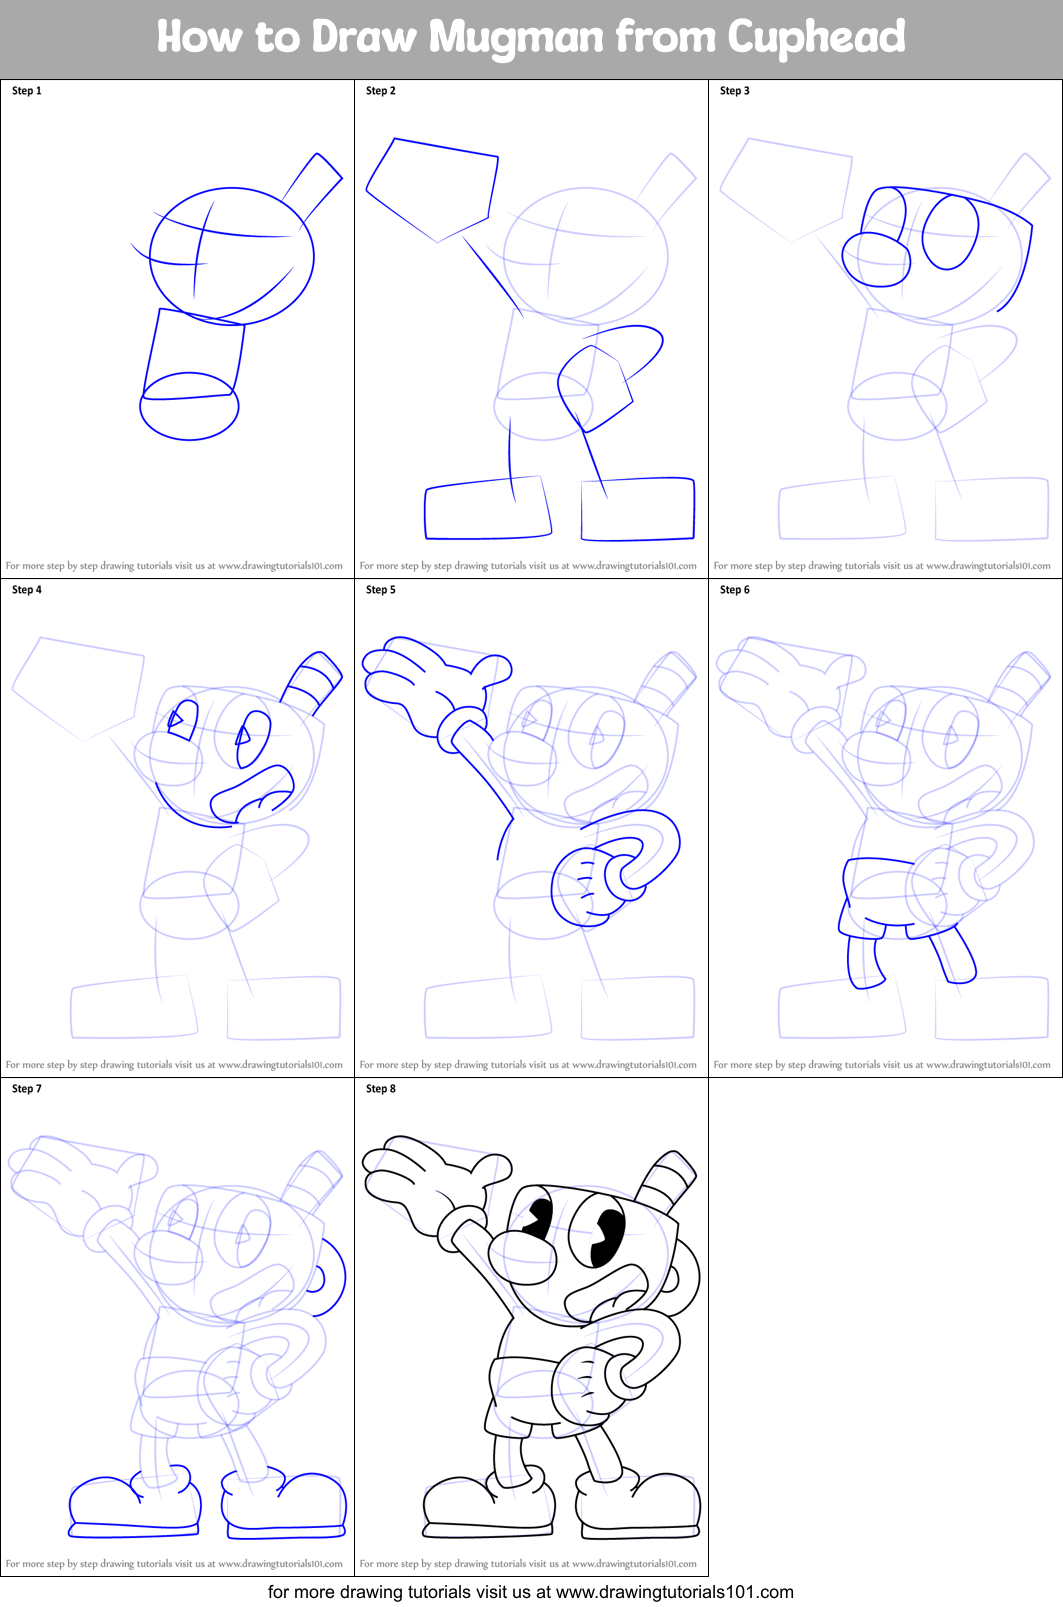 How to Draw Mugman from Cuphead printable step by step drawing sheet